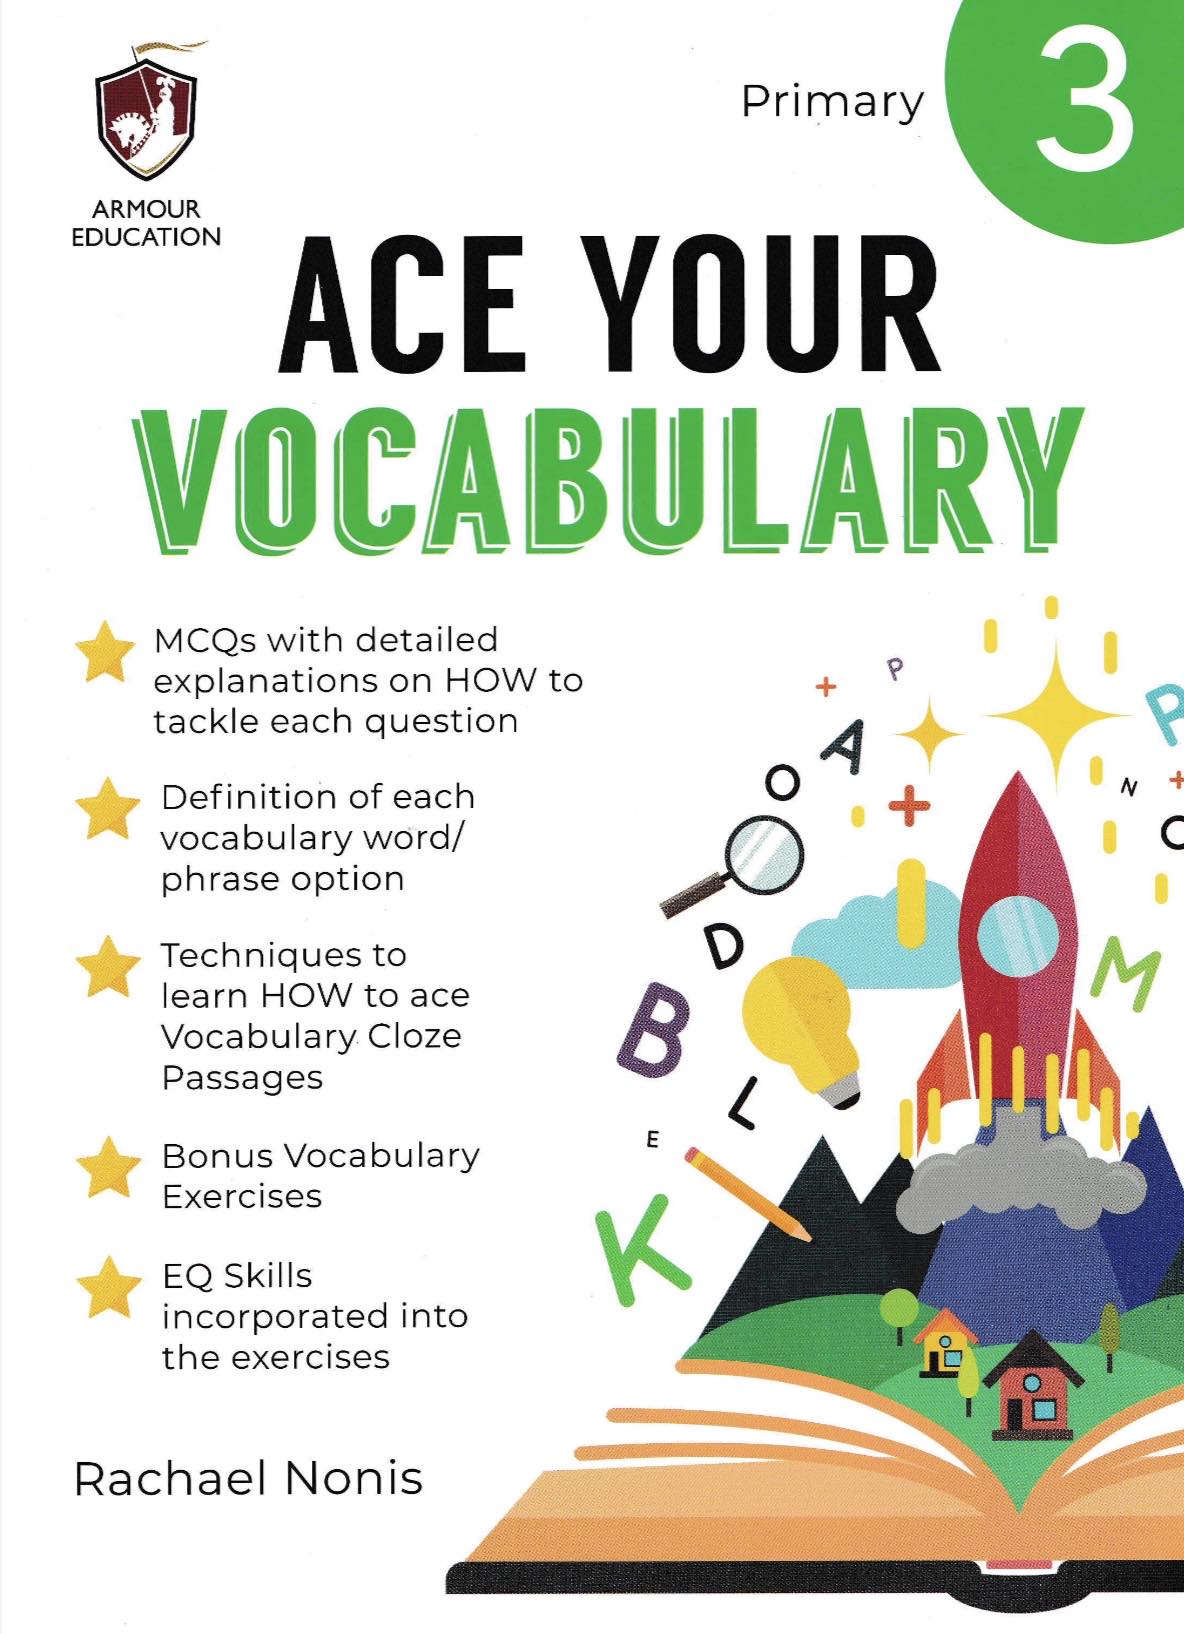 Ace Your Vocabulary for Primary Levels